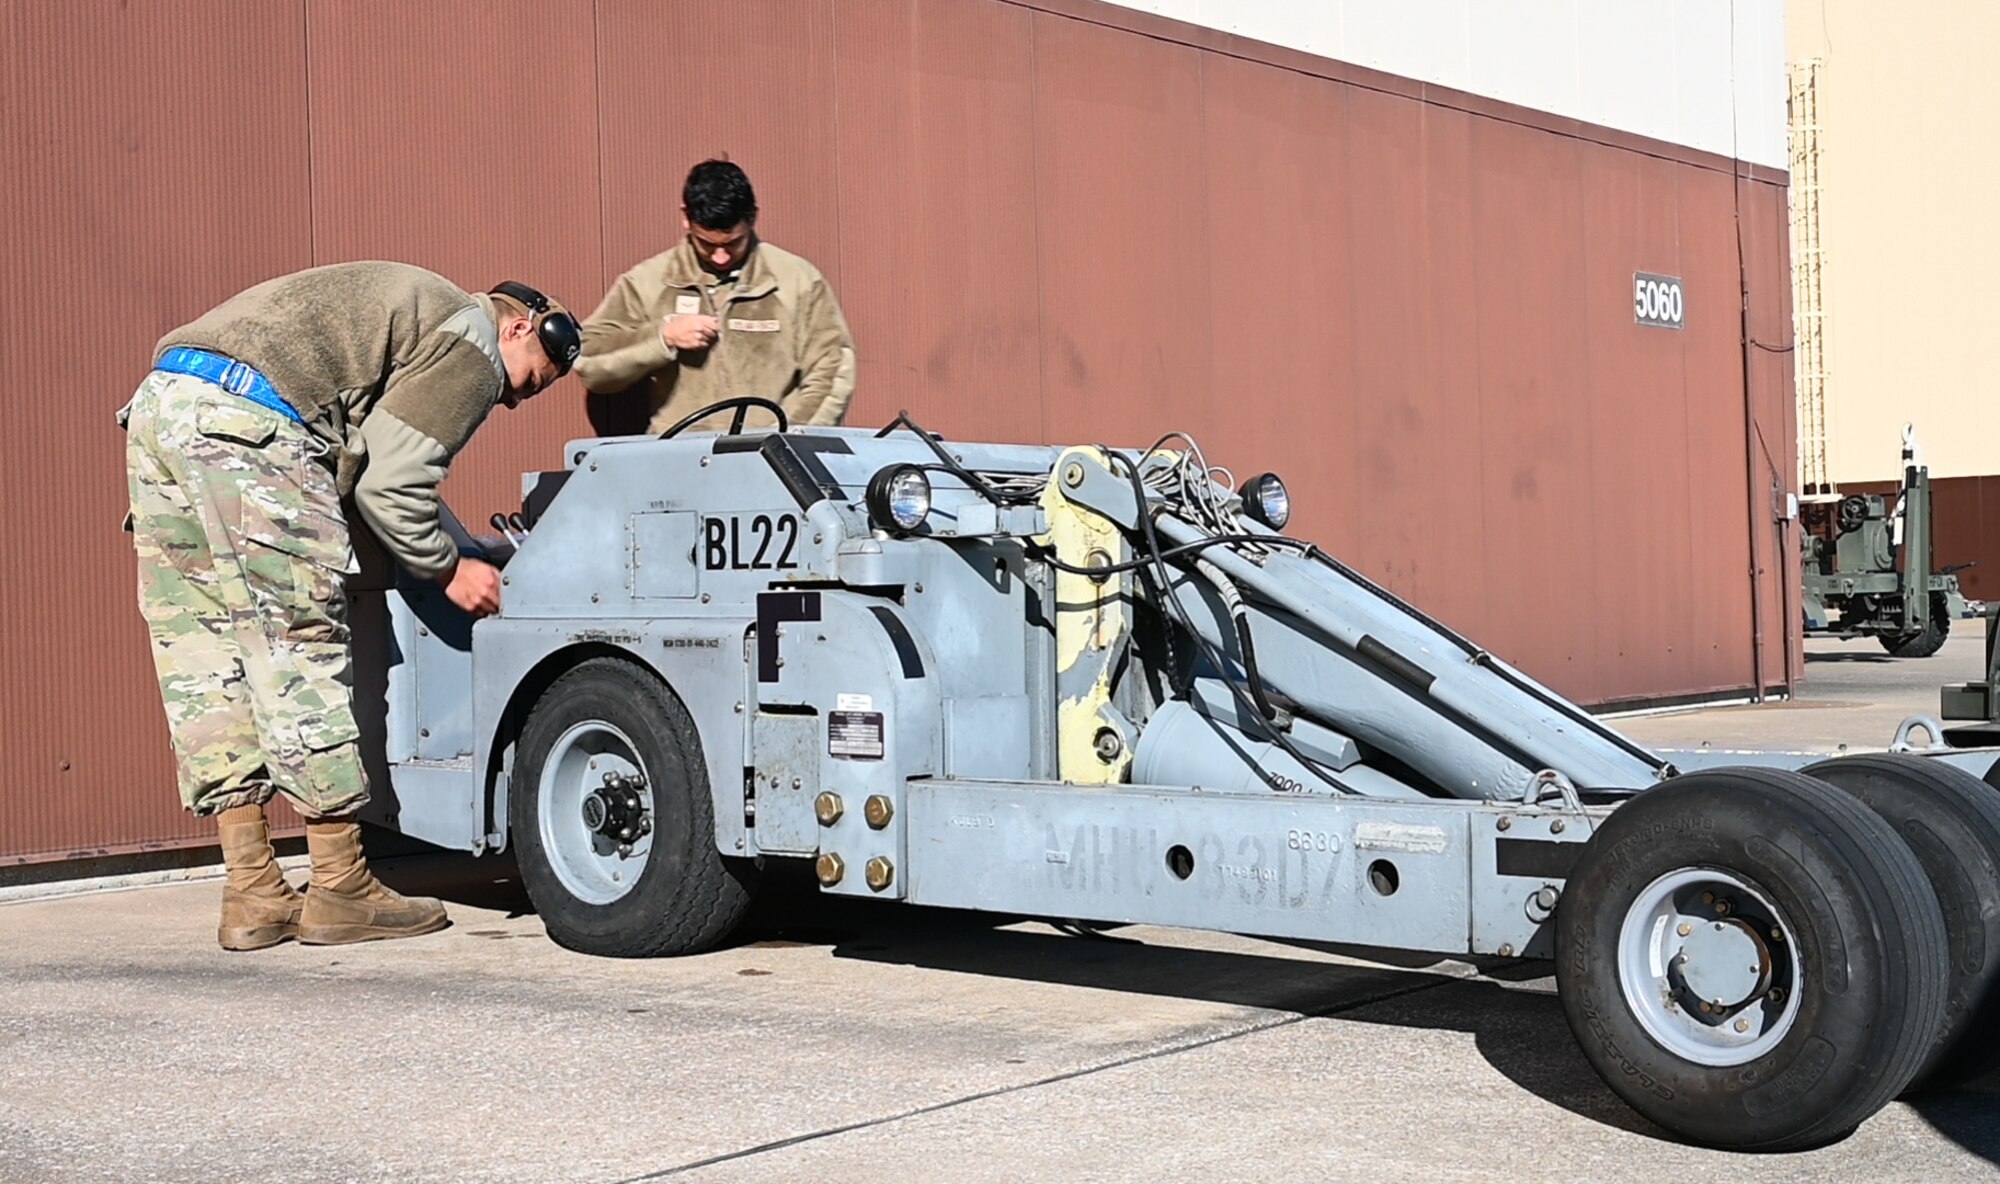 Senior Airman Jesse Papenhausen and Airman 1st Class Toby Rodriguez, 509th Aircraft Maintenance Squadron, weapons load crew members, prepare a jammer to be driven at Whiteman Air Force Base, Missouri, Feb. 2, 2023. The jammer is used to install a smart bomb rack assembly. (U.S. Air Force photo by Airman 1st Class Hailey Farrell)